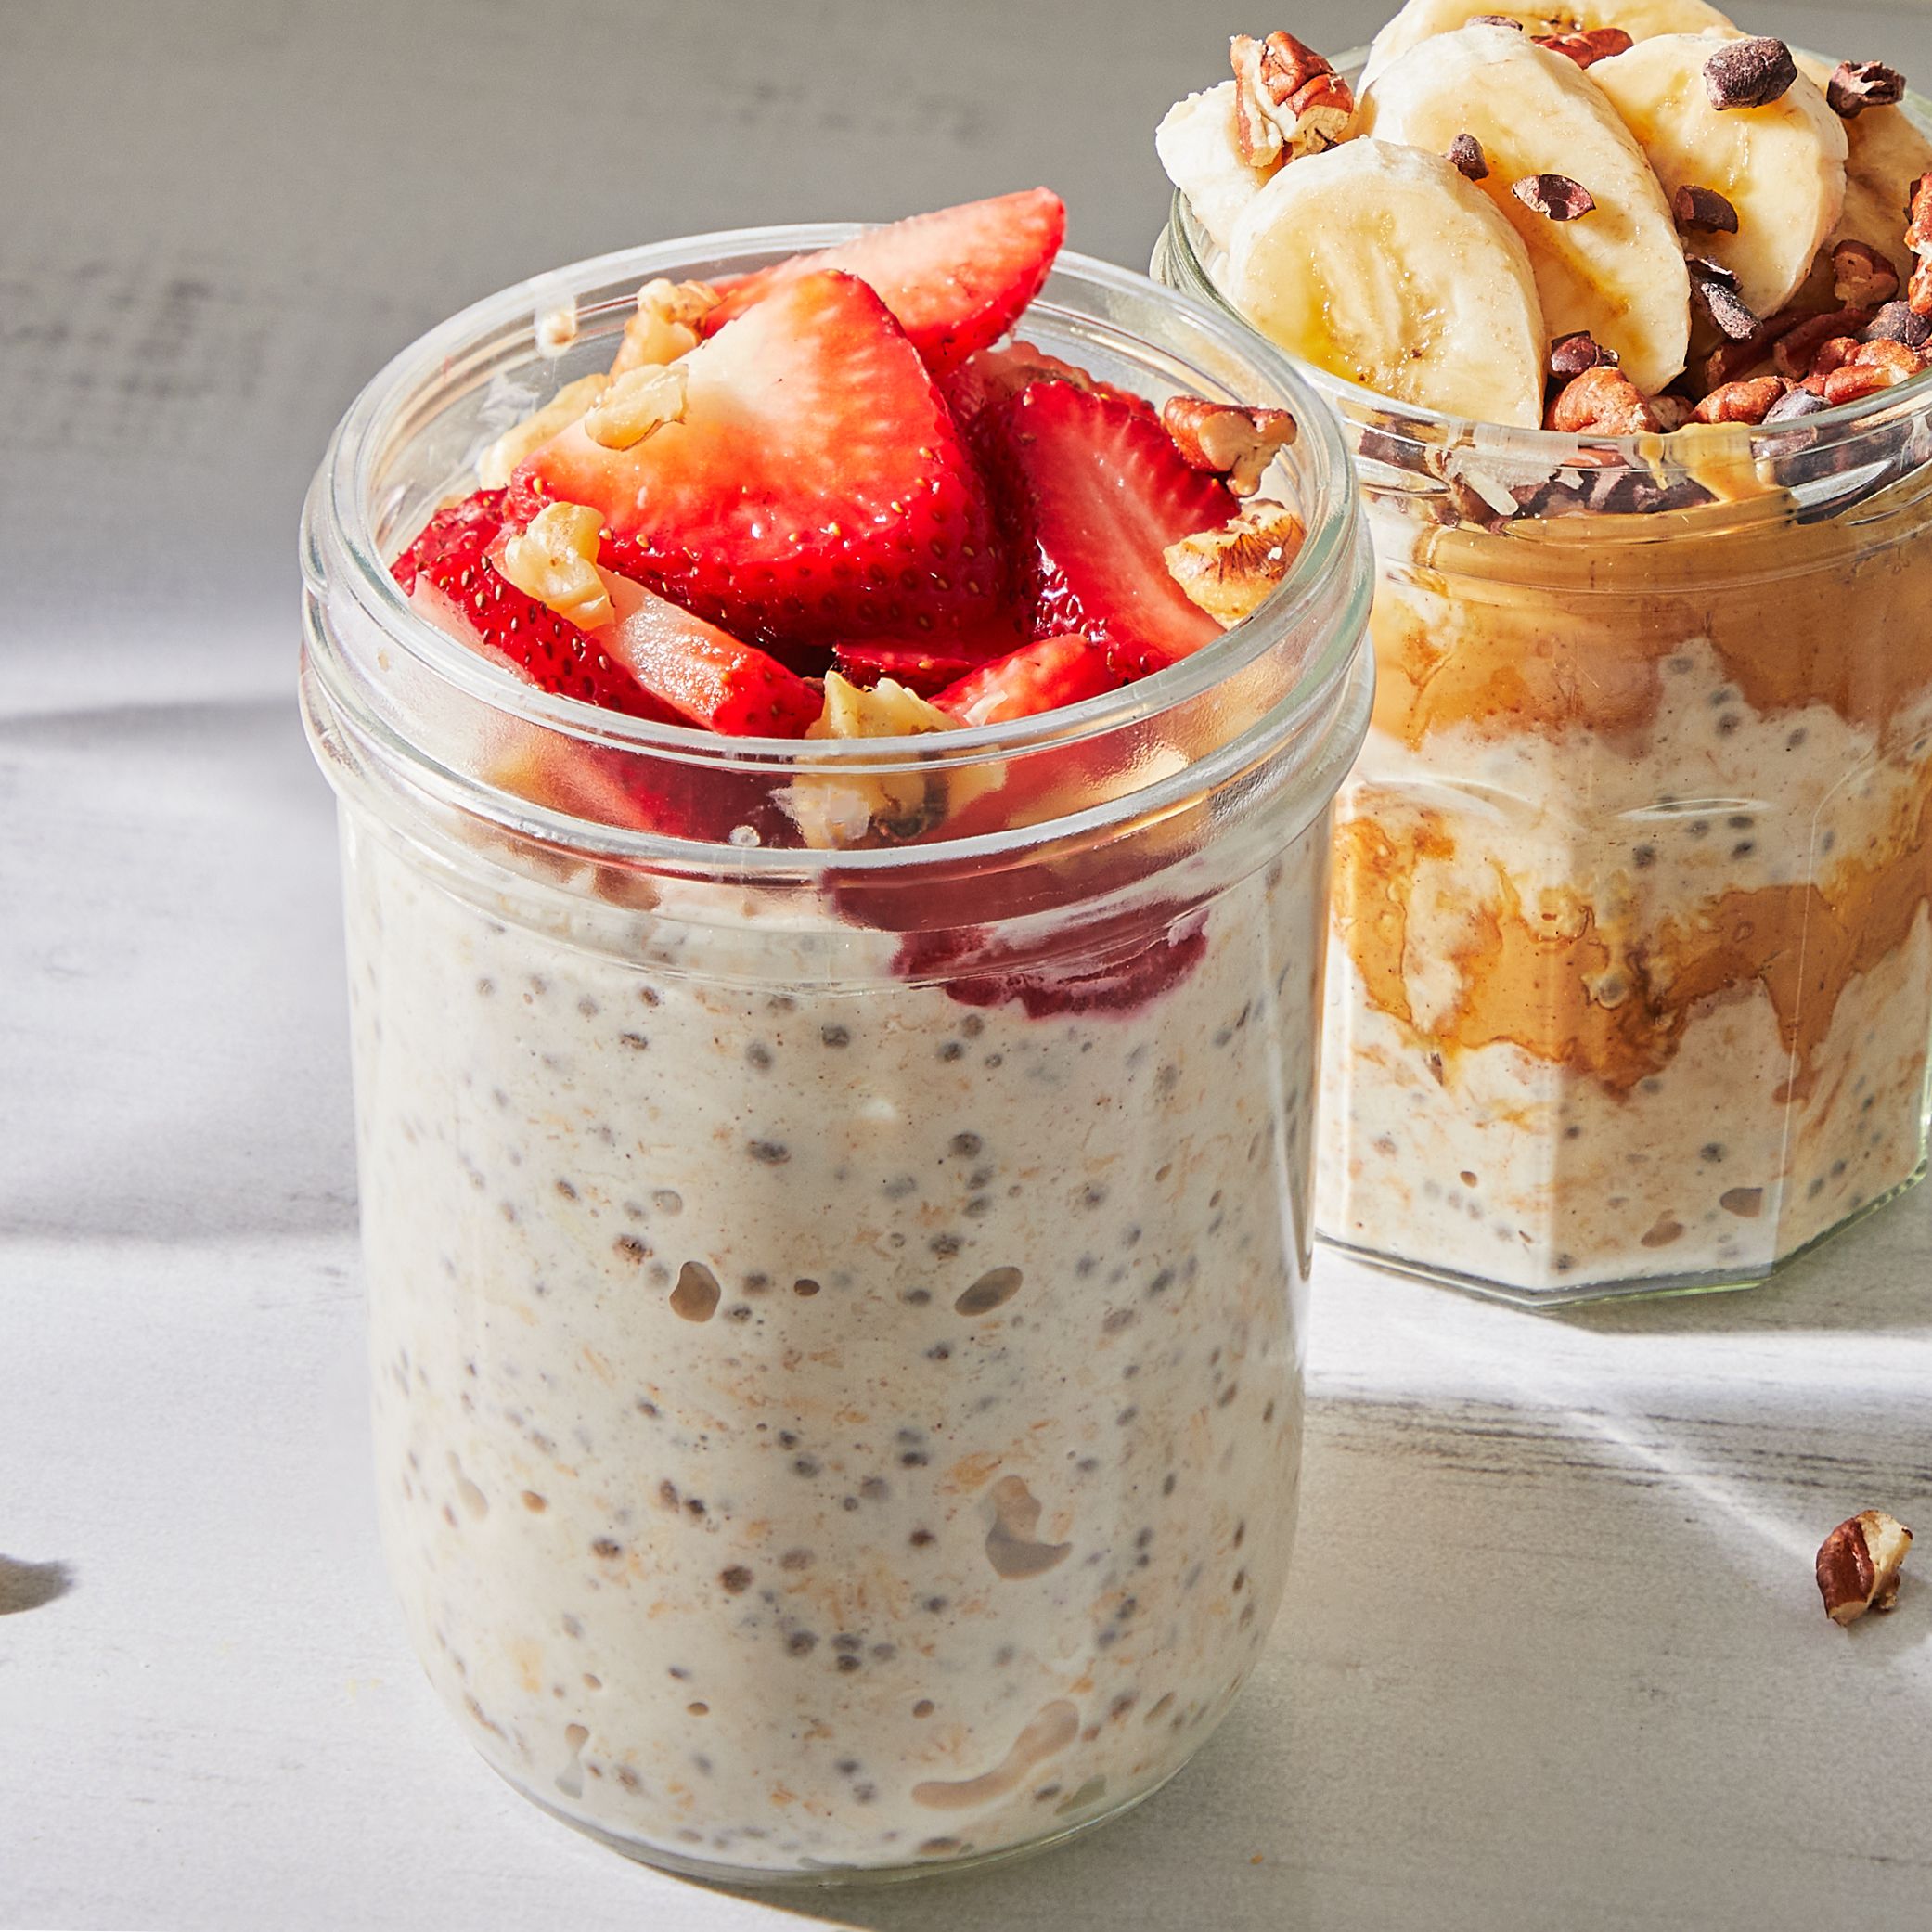 BEST Overnight Oats {Five Delicious Ways!} - Cooking Classy